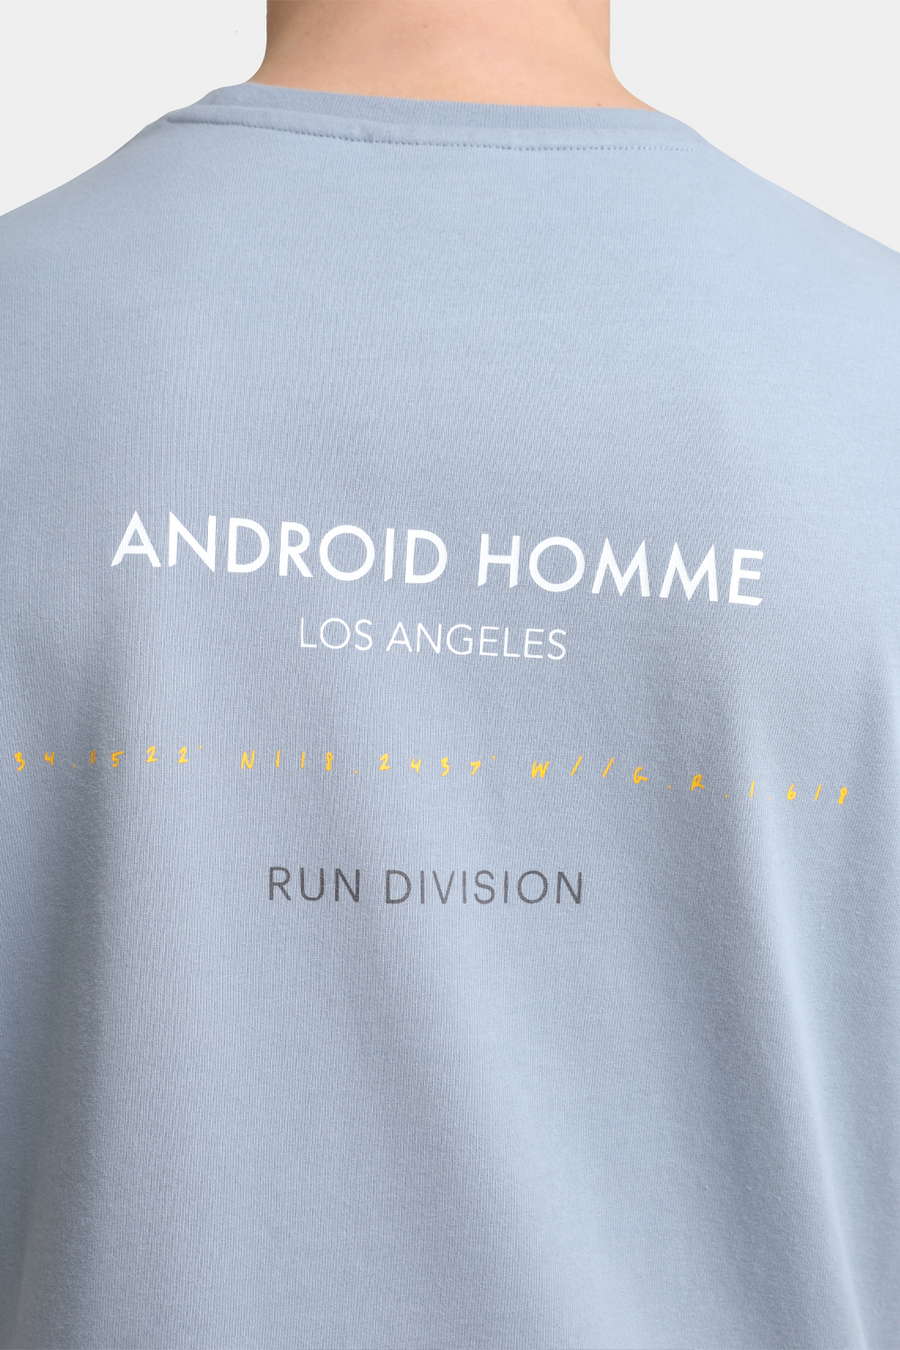 Buy the Android Homme Run Division T-Shirt in Grey at Intro. Spend £50 for free UK delivery. Official stockists. We ship worldwide.